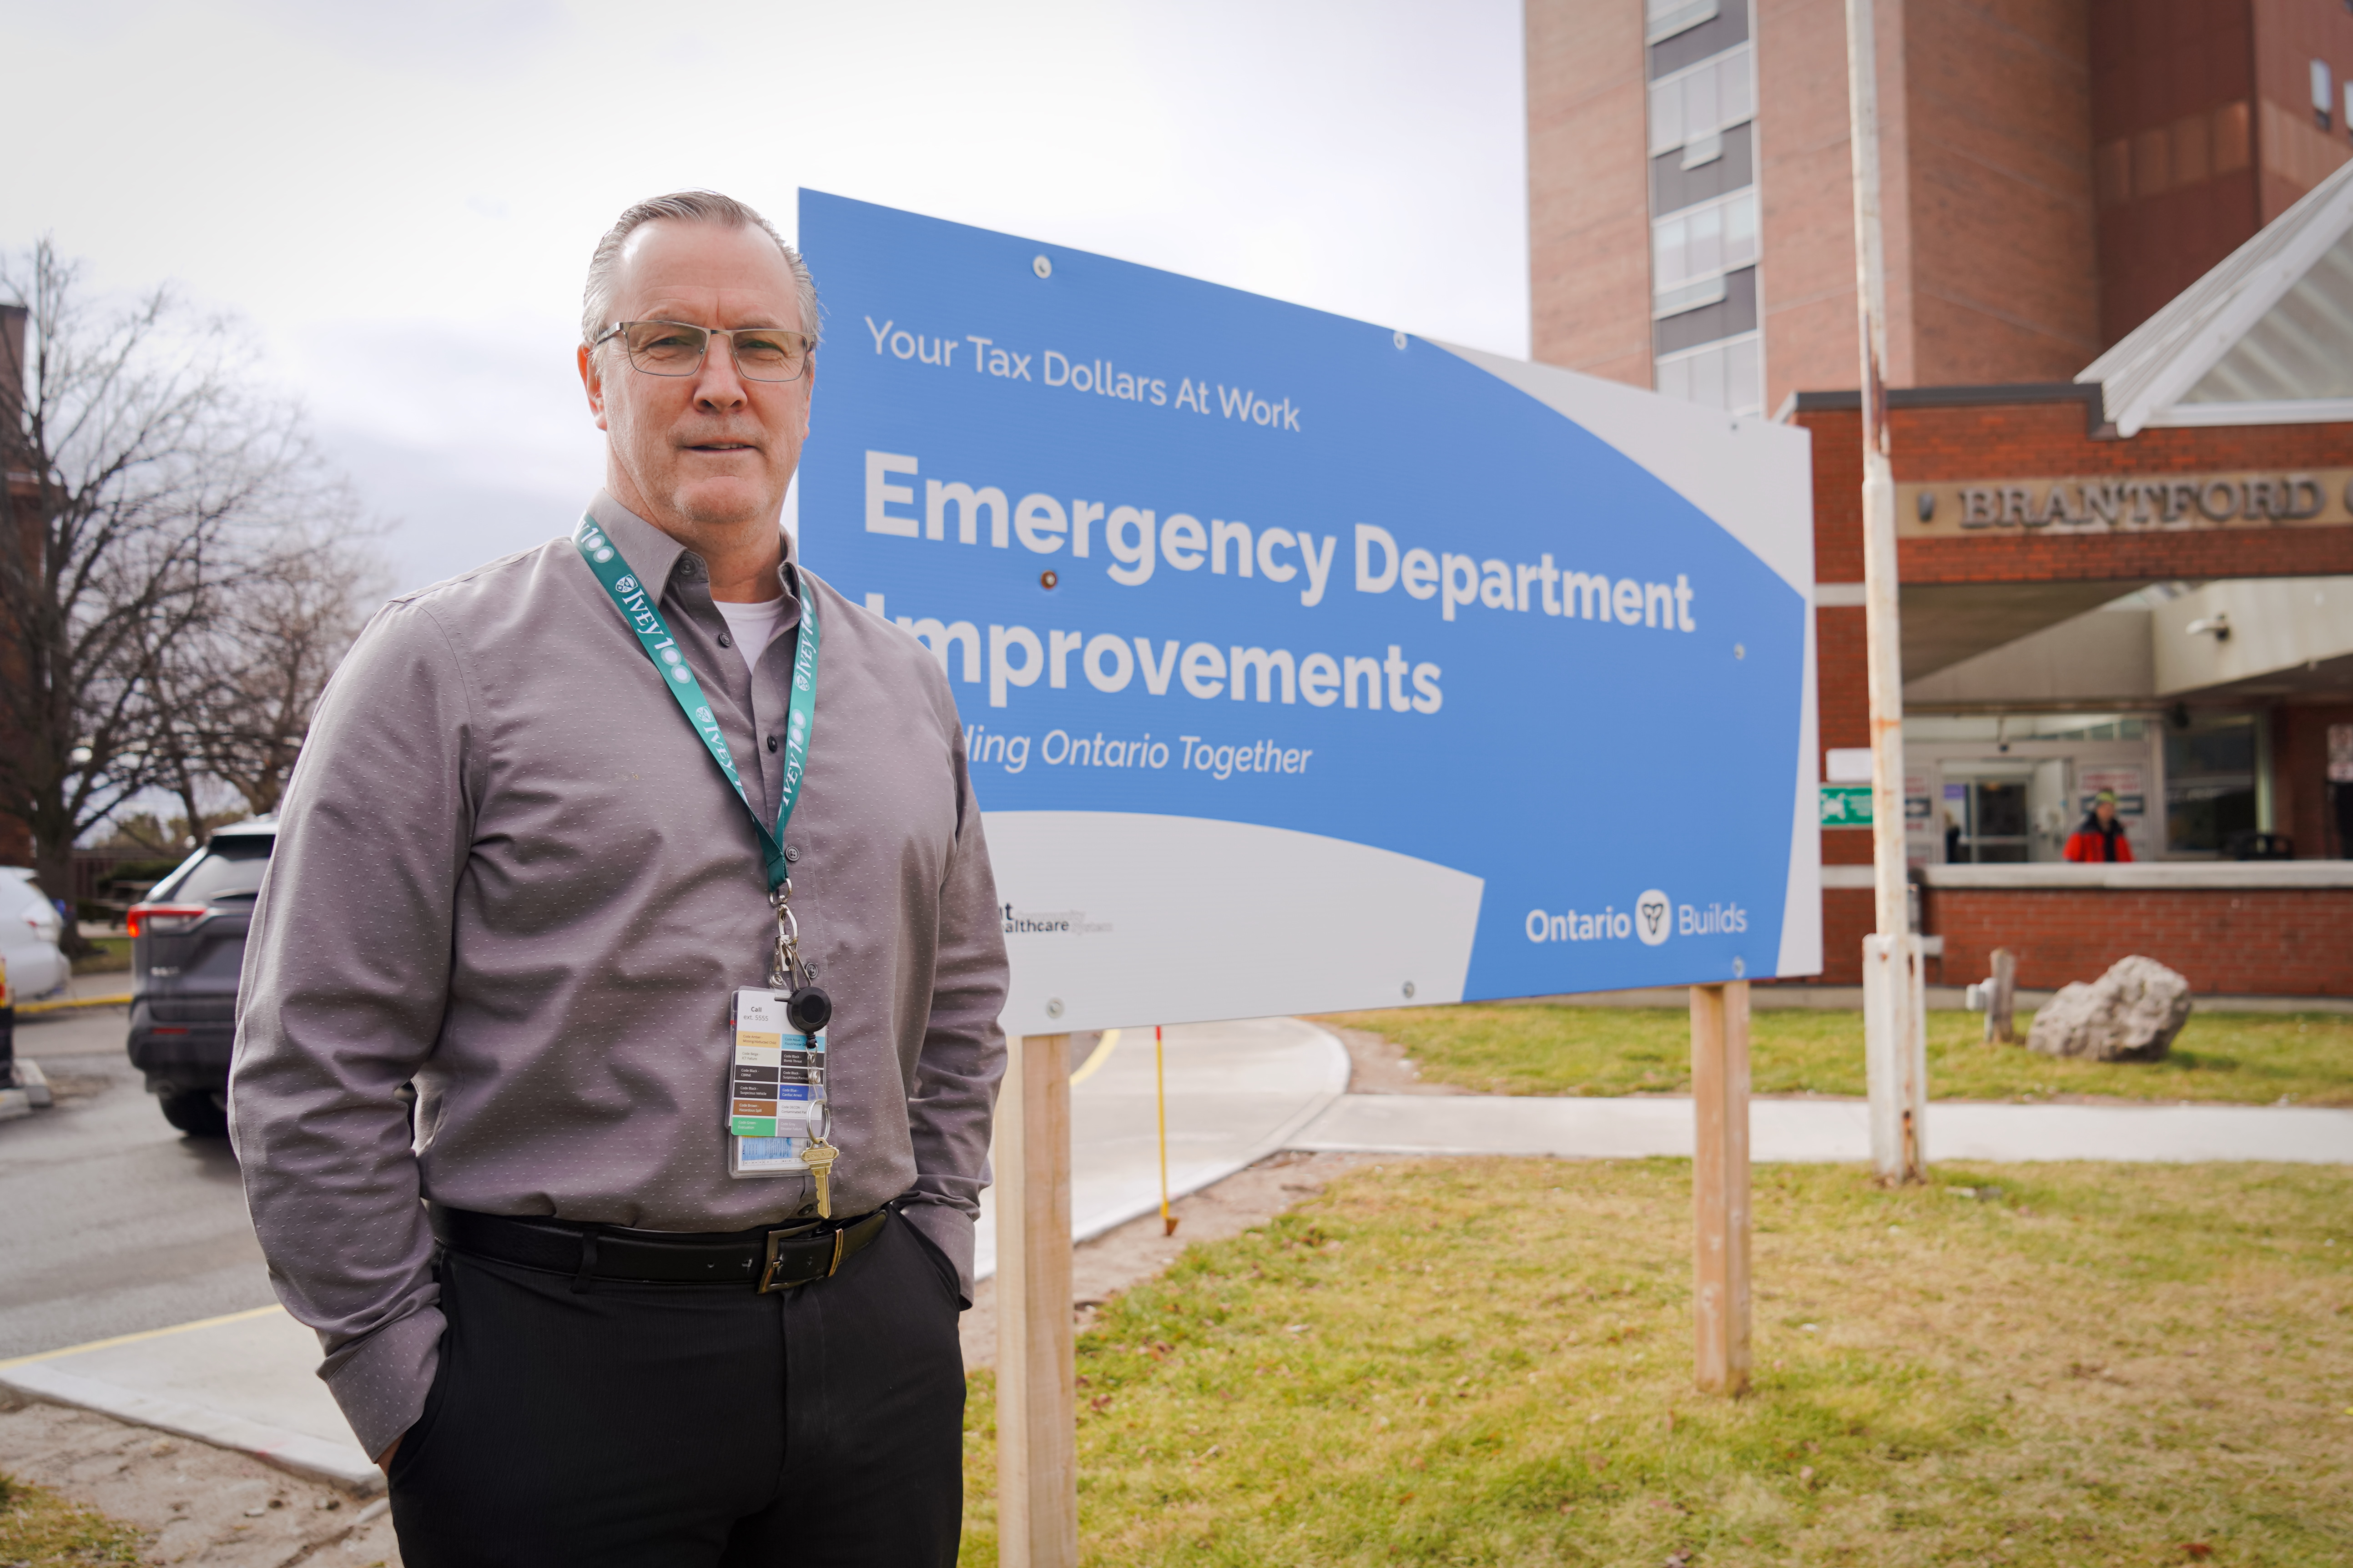 Don Hall, senior director, corporate infrastructure and redevelopment with the Brant Community Healthcare System, says the redevelopment of Brantford General Hospital is one of the most difficult he has encountered in more than 30 years of experience.